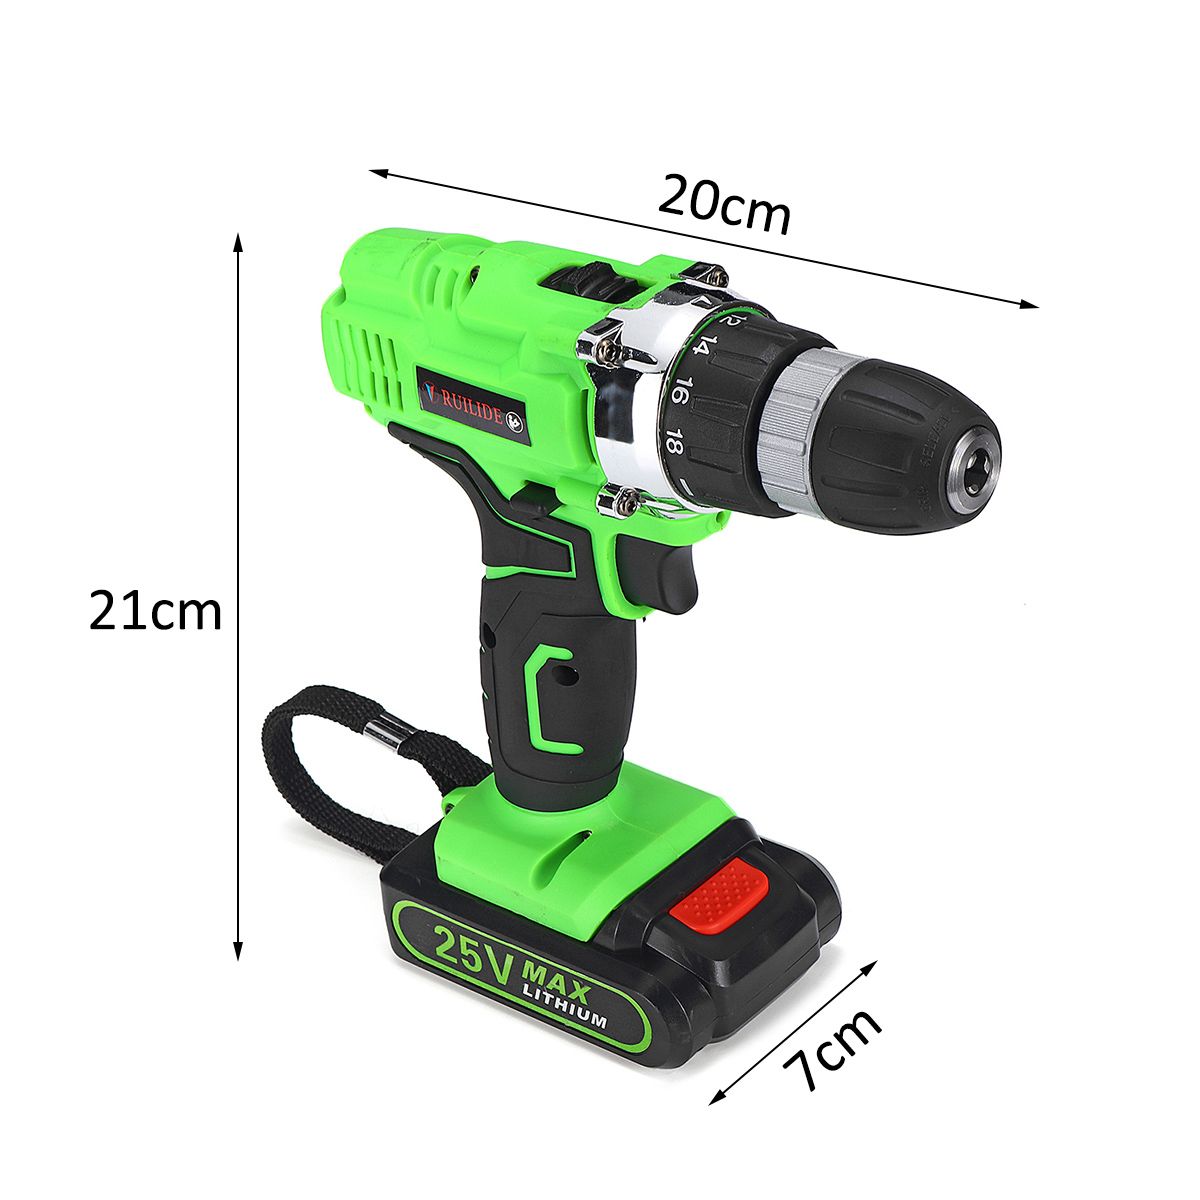 25V-Li-ion-Electric-Screwdriver-Dual-Speed-Power-Screw-Driver-Tool-For-DIY-Building-Engineering-1368106